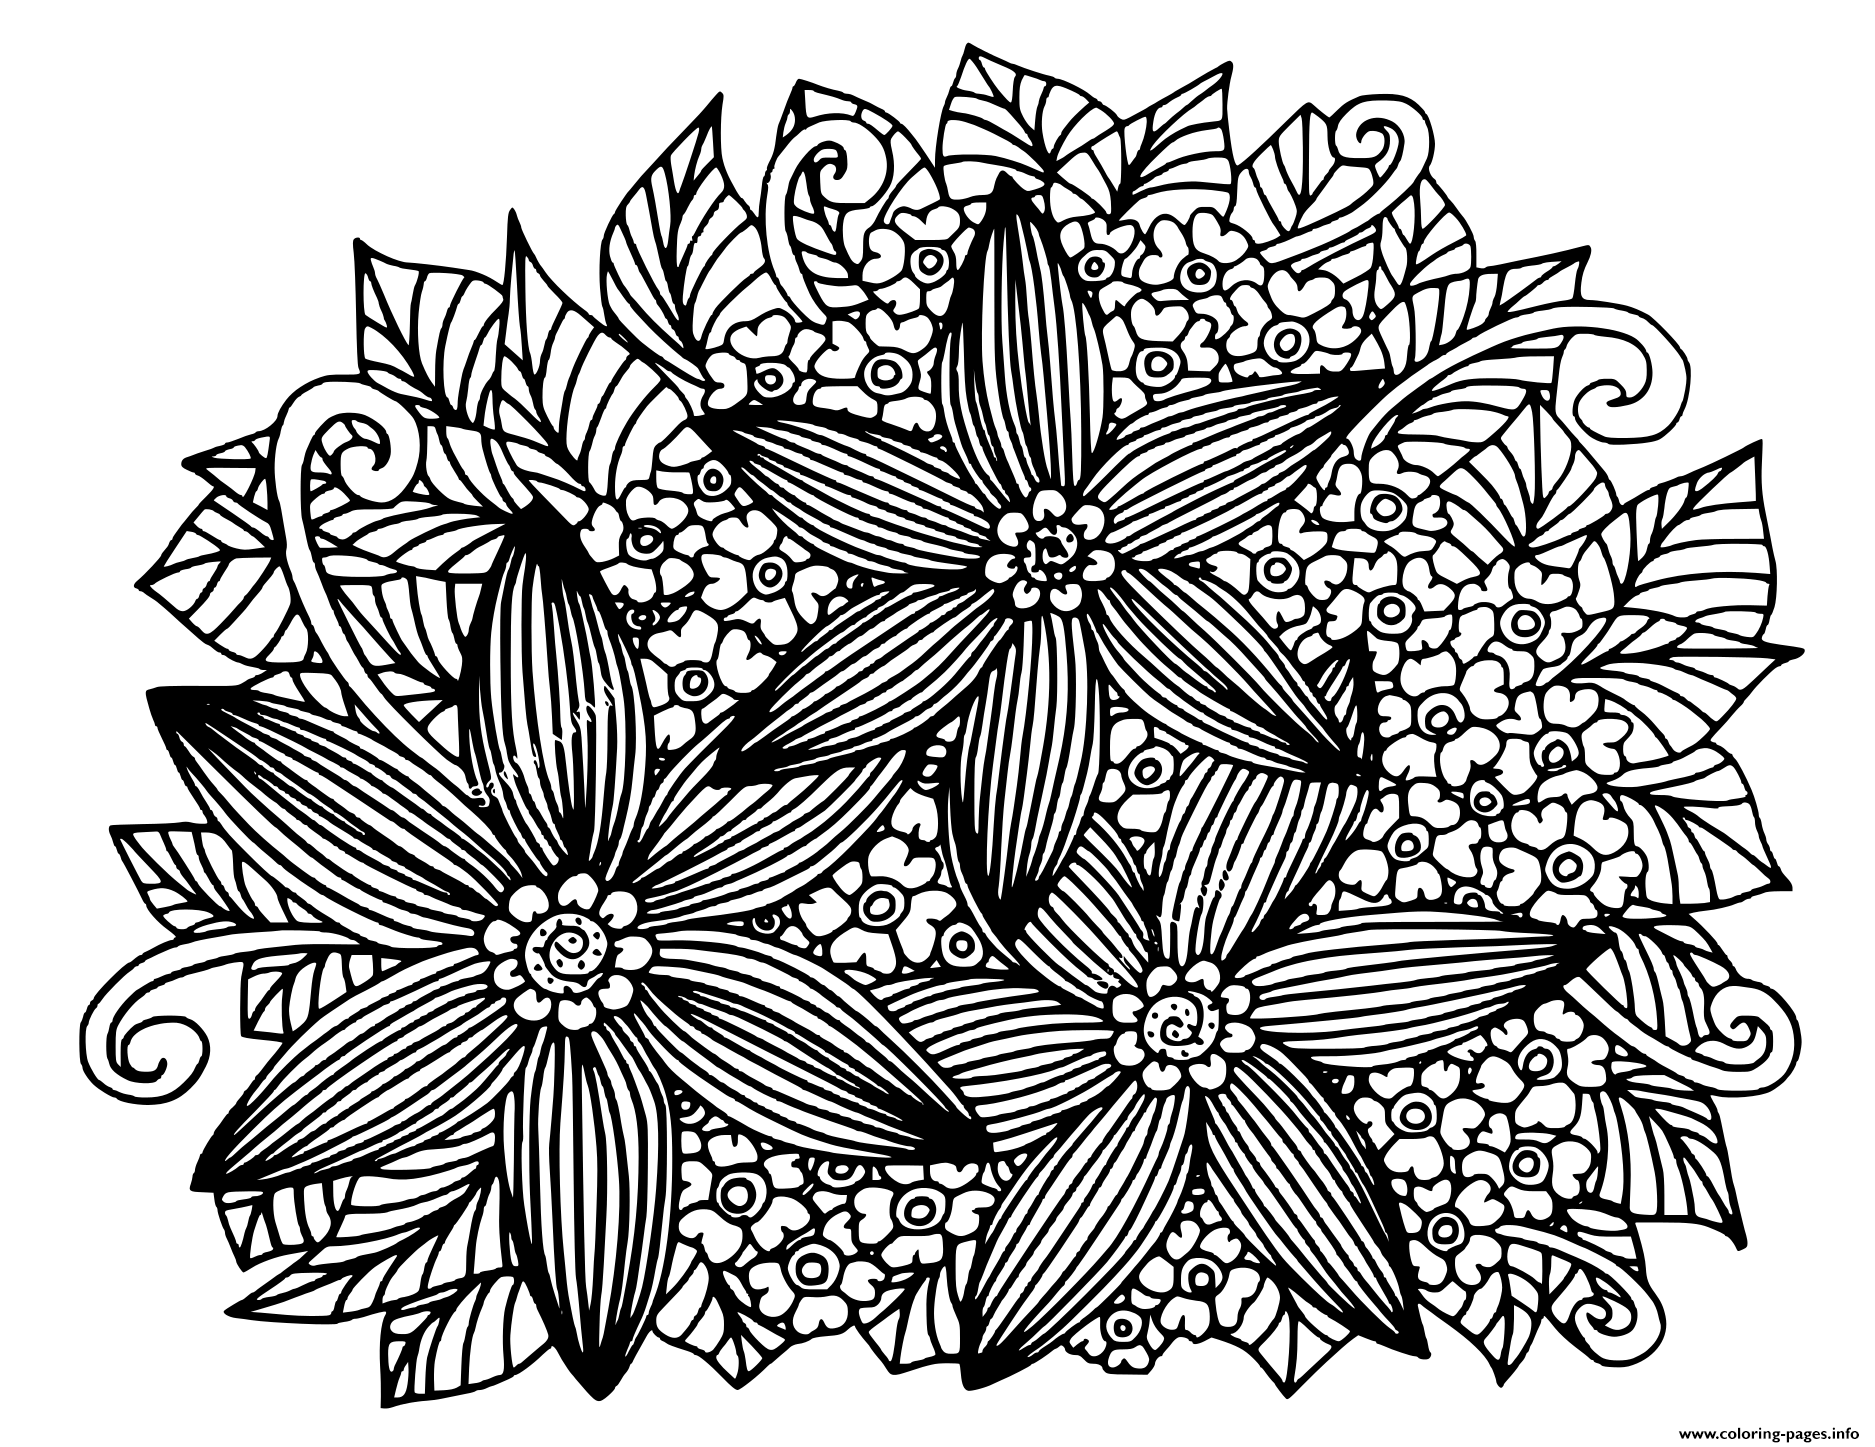 Hand Drawn Floral Doodle Adult coloring